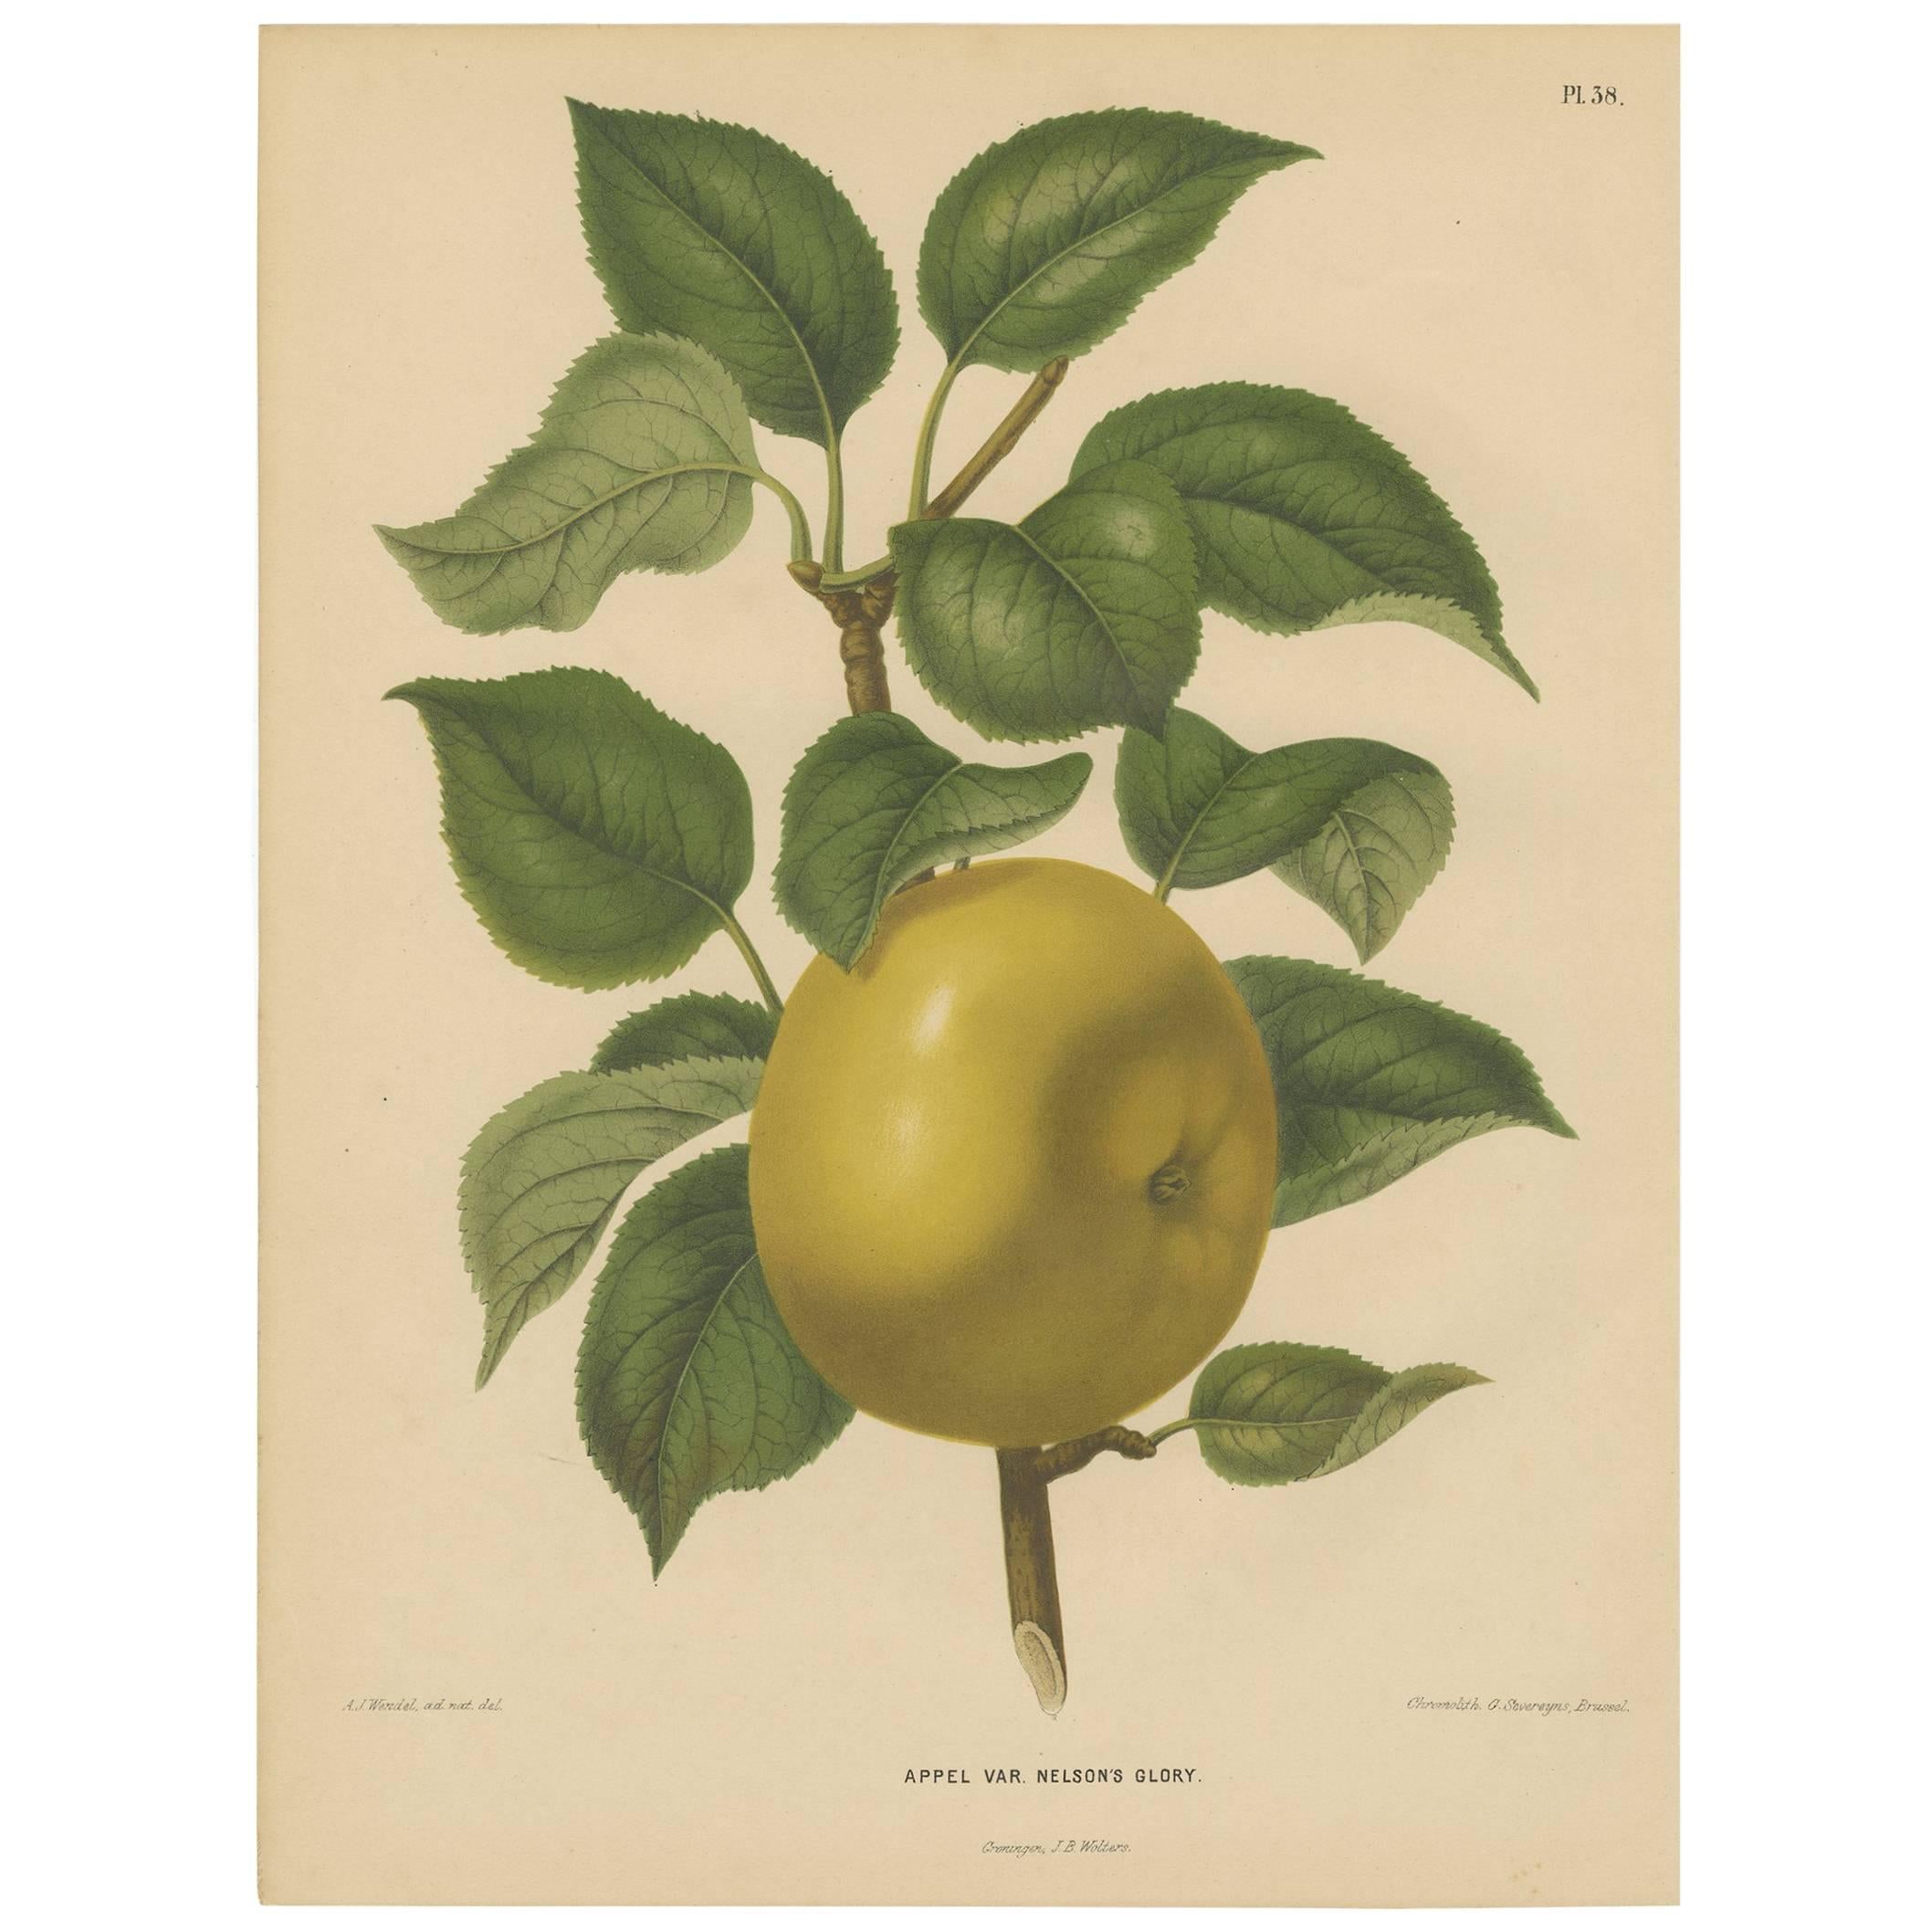 Antique Print of Nelson's Glory Apple by G. Severeyns, 1876